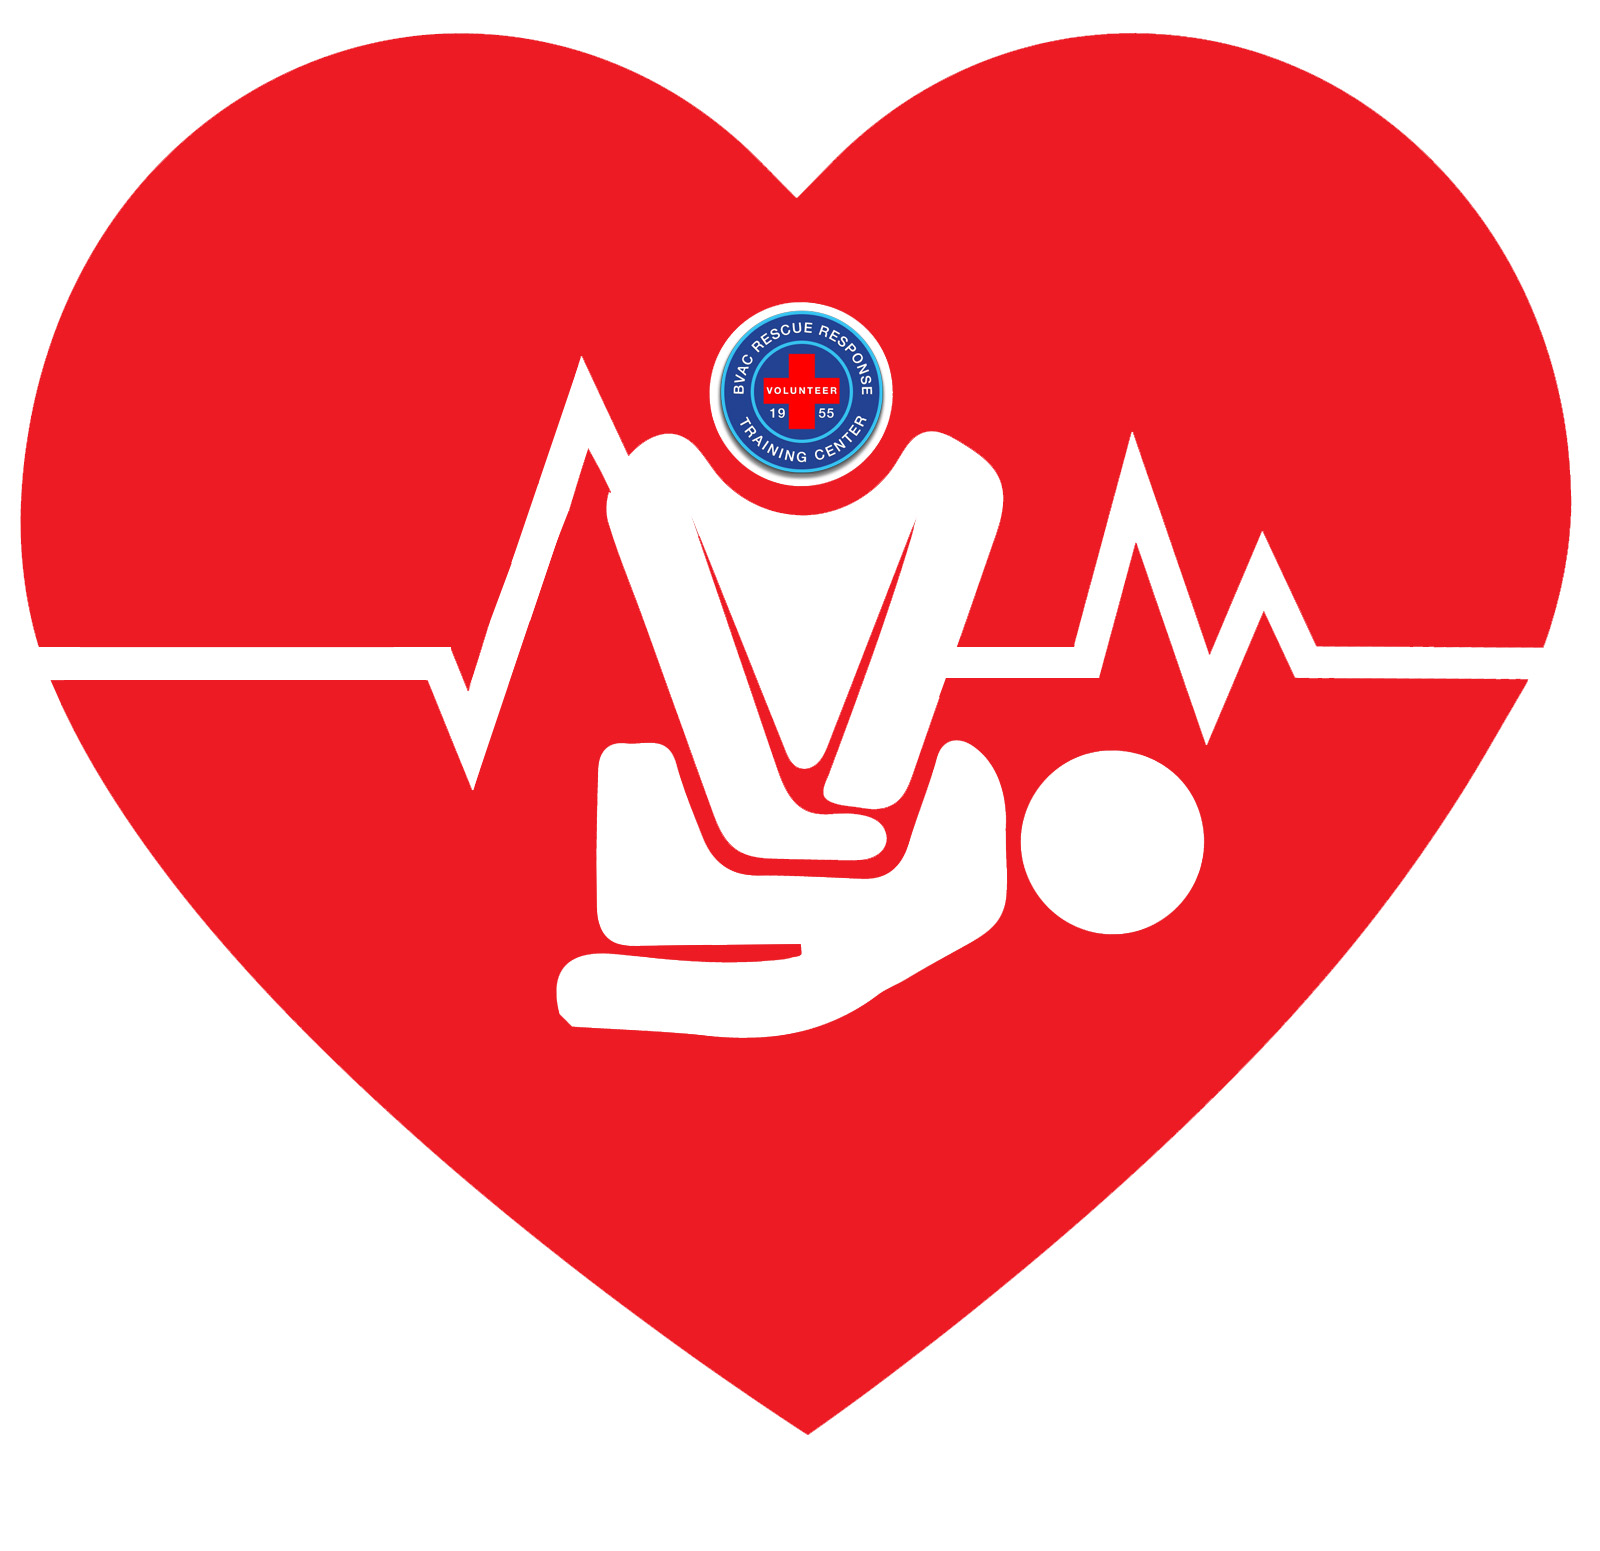 Who Should take a BLS CPR Course for Essential Life-Saving Skills